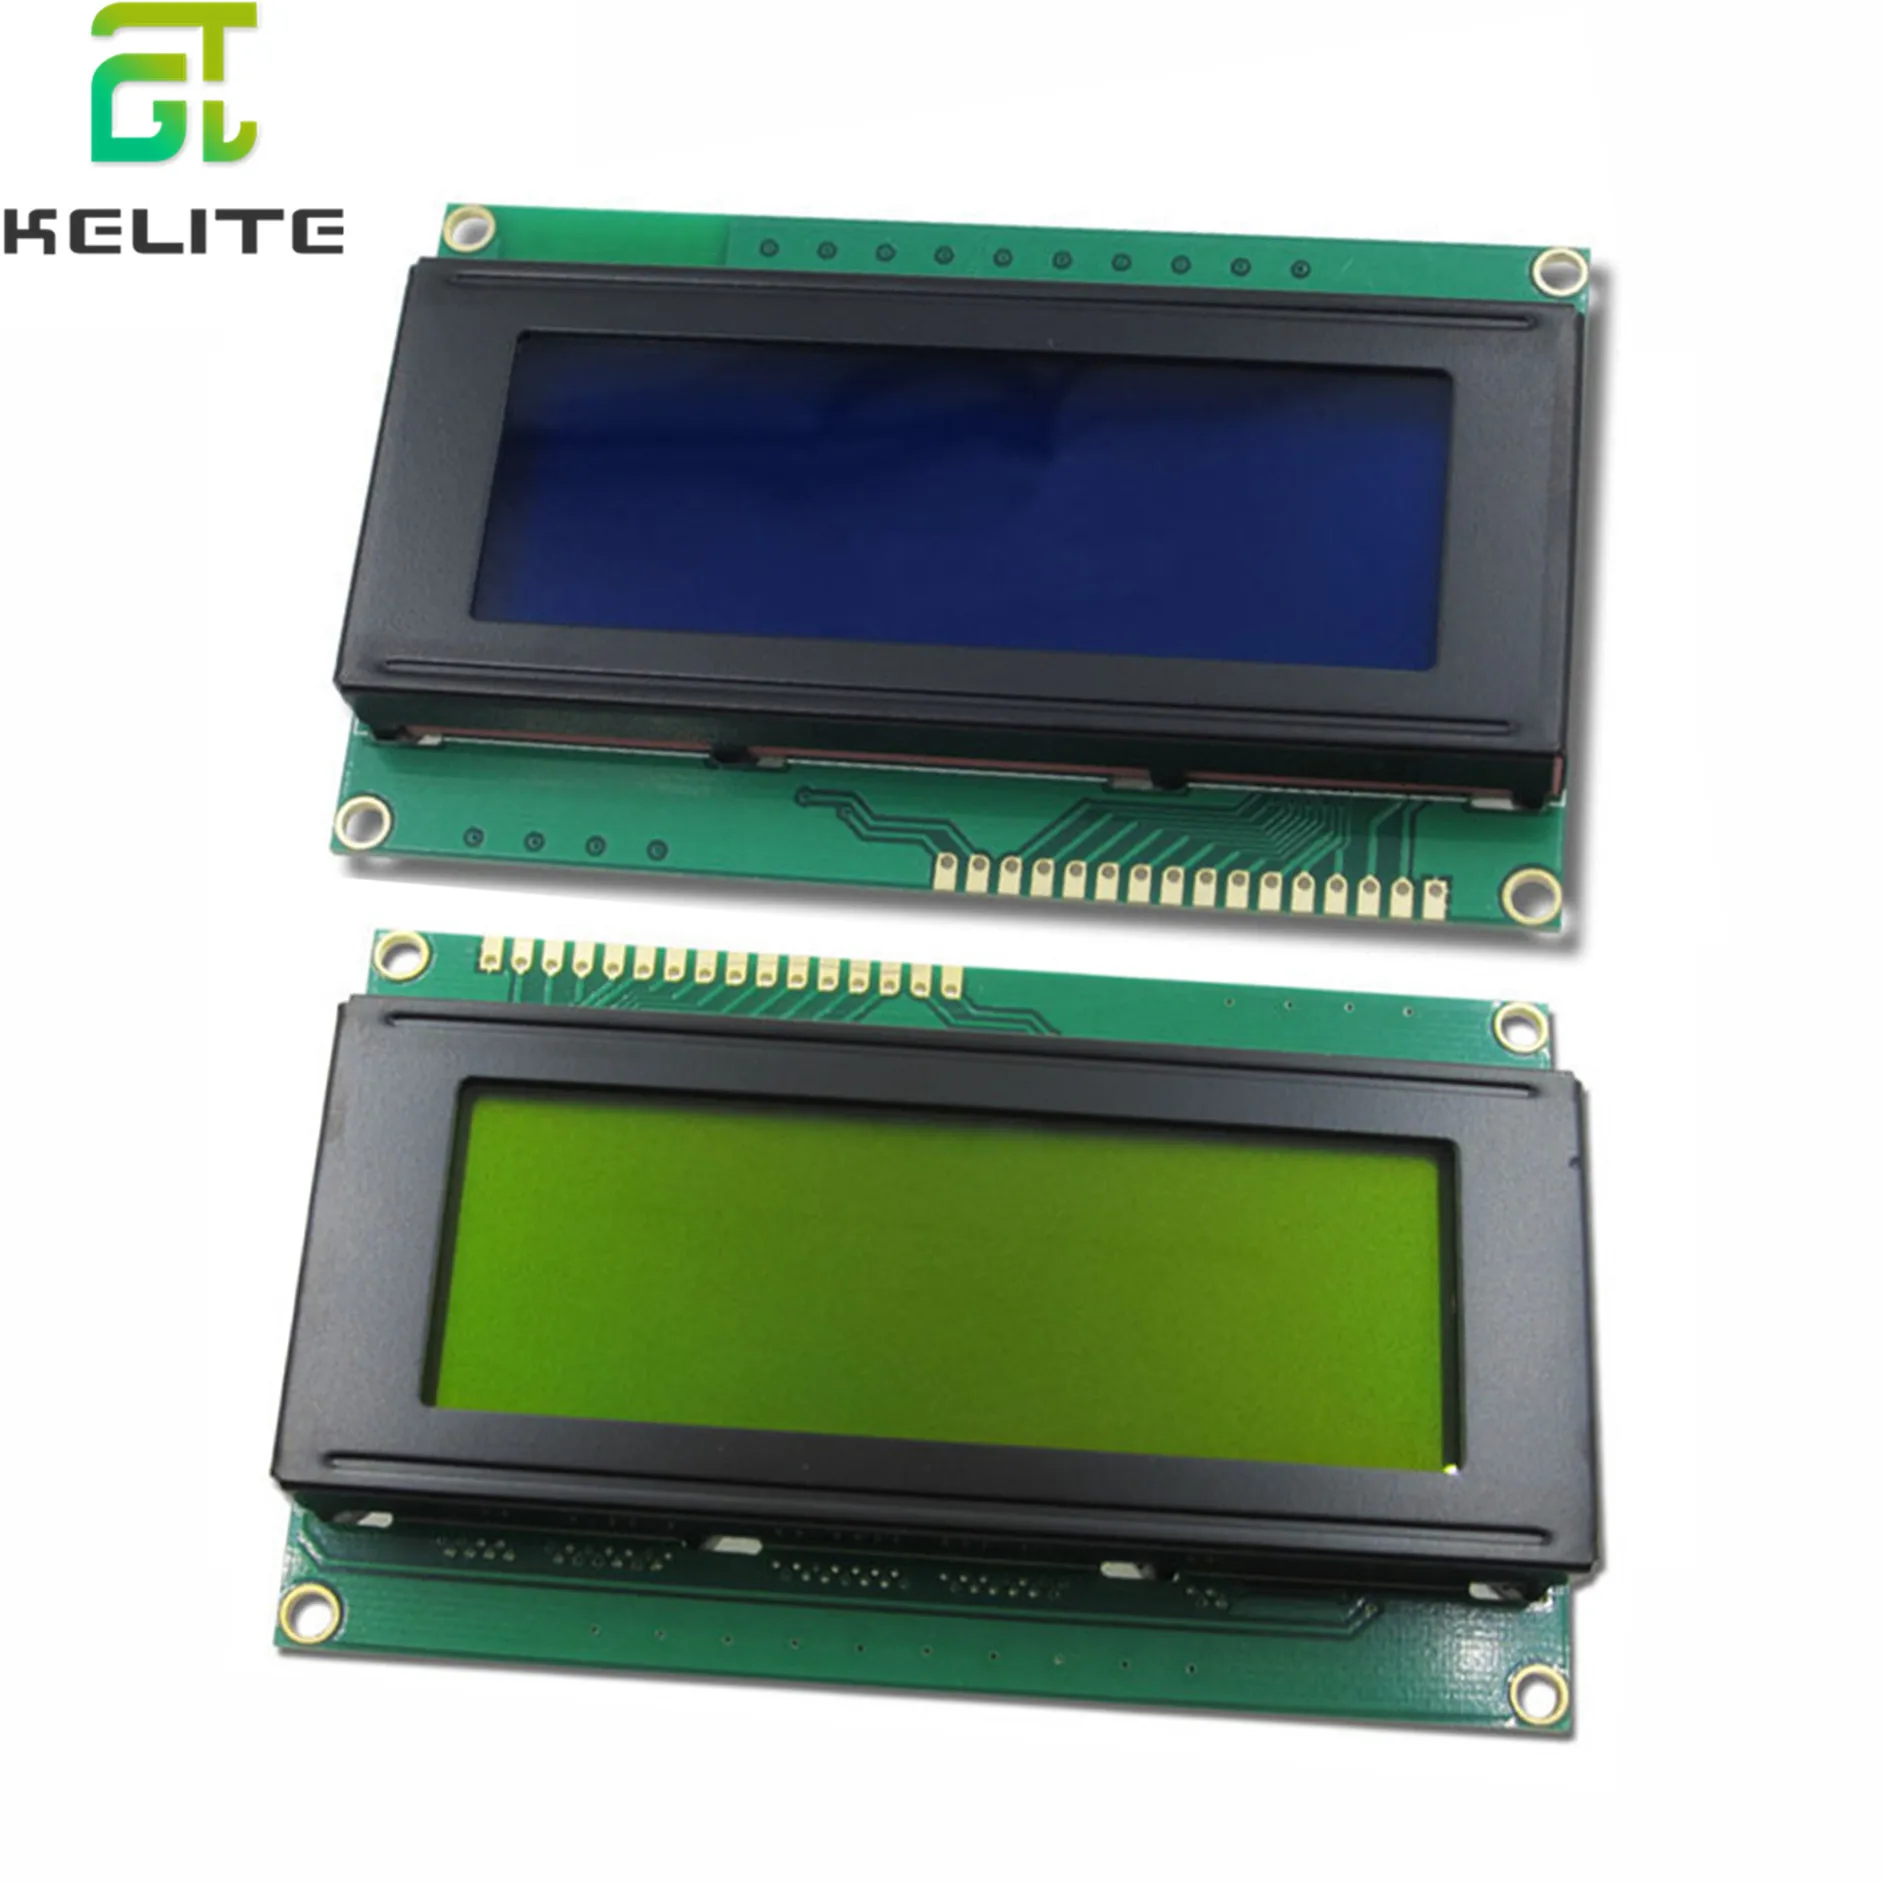 20pcs 20x4 LCD Modules 2004 LCD Module with LED Blue/Green Backlight White Character/Yellow Green 20x4 lcd modules 2004 lcd module with led blue backlight white character yellow green